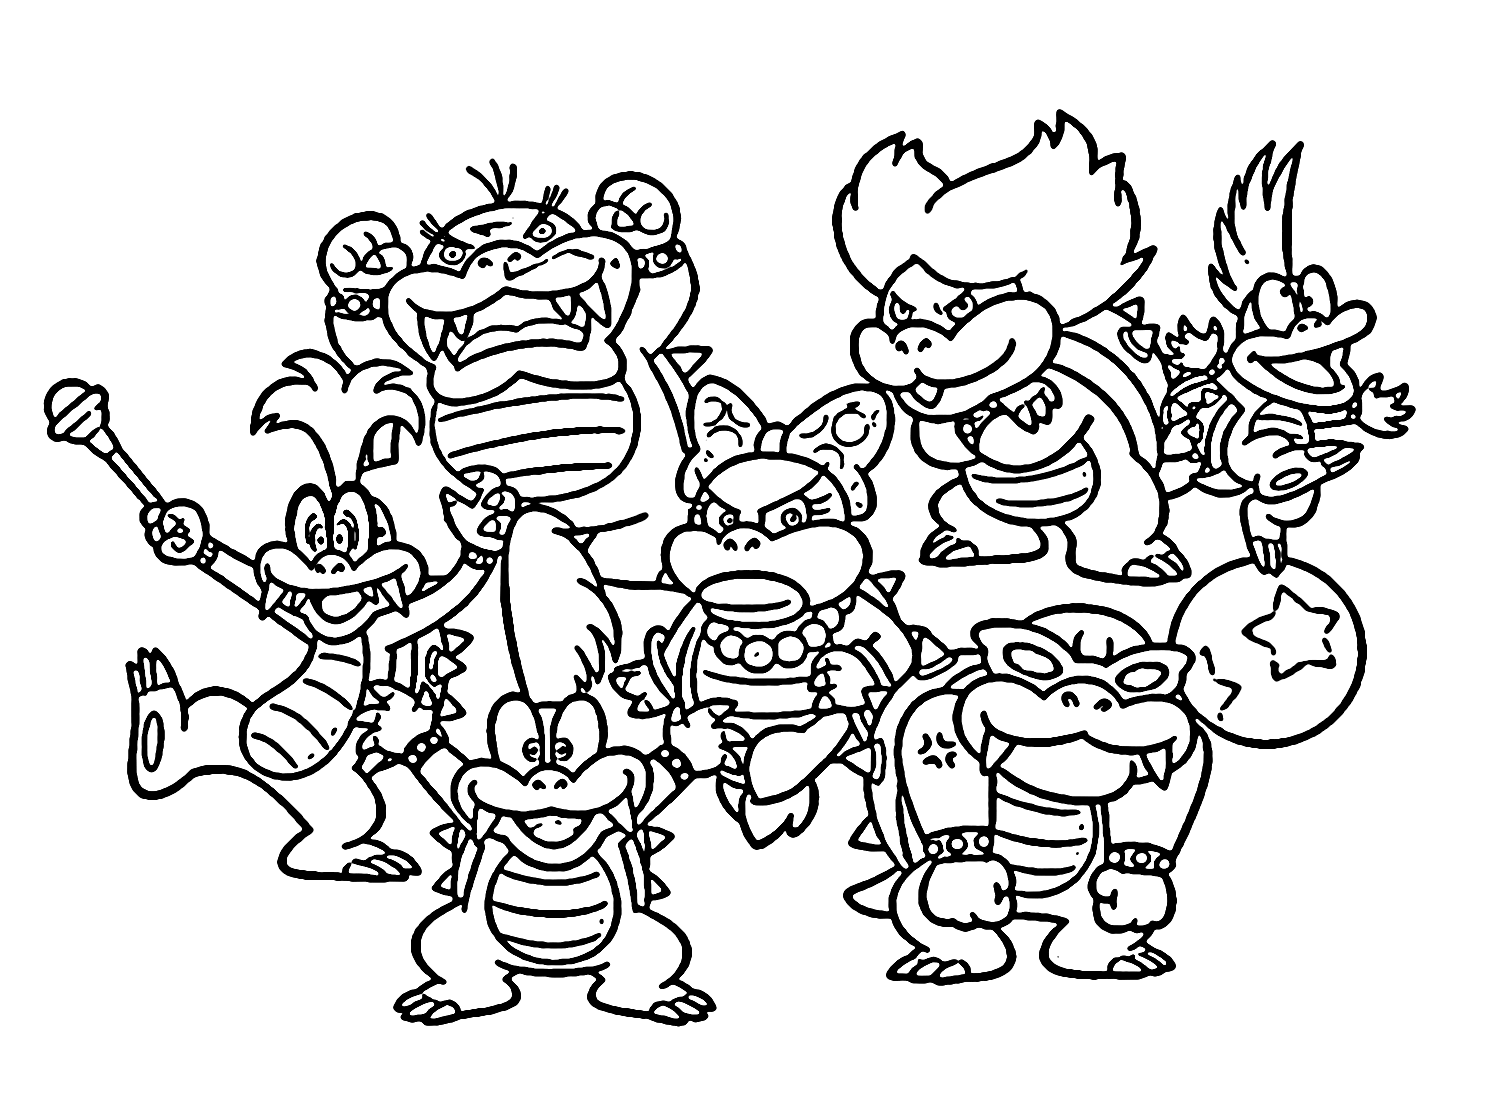 Koopalings Pictures Coloring Page